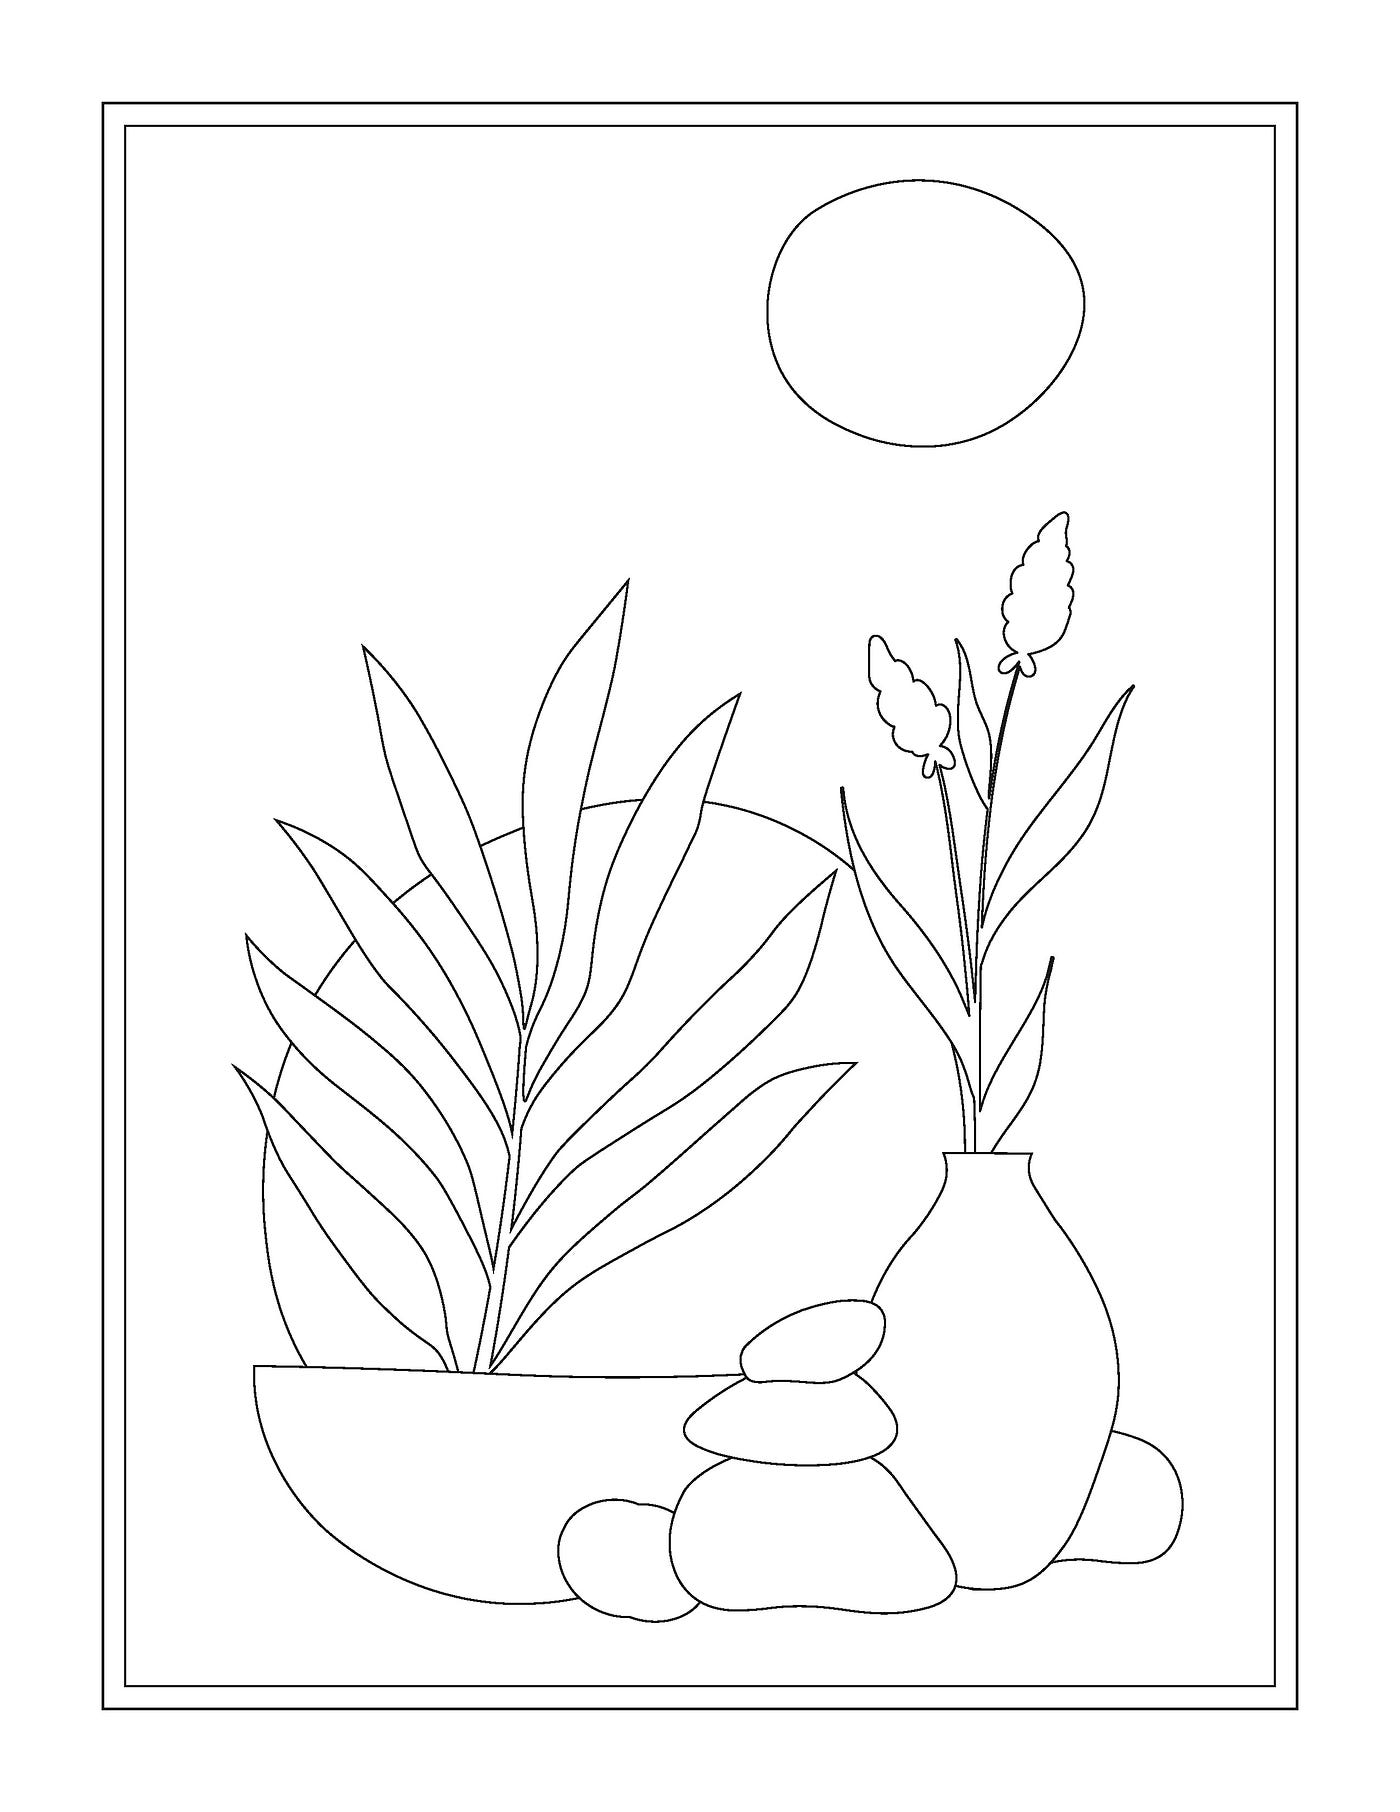 Minimalism Adult and Teen Coloring Book